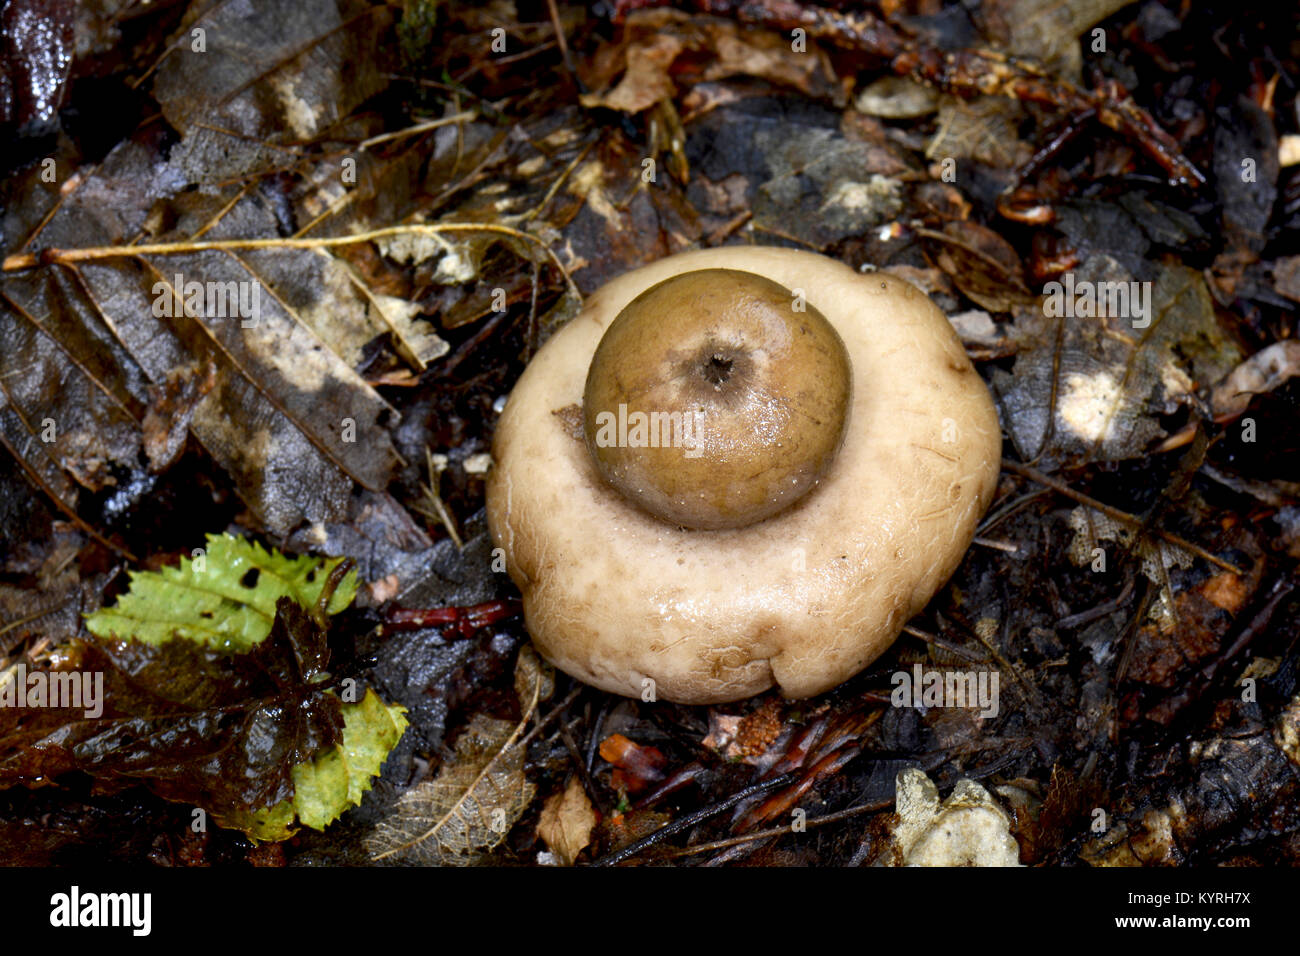 Fringed Earthstar, Sessile Earthstar (Geastrum fimbriatum), fruit body  ebverted its cap to get spores better thrown out. Stock Photo